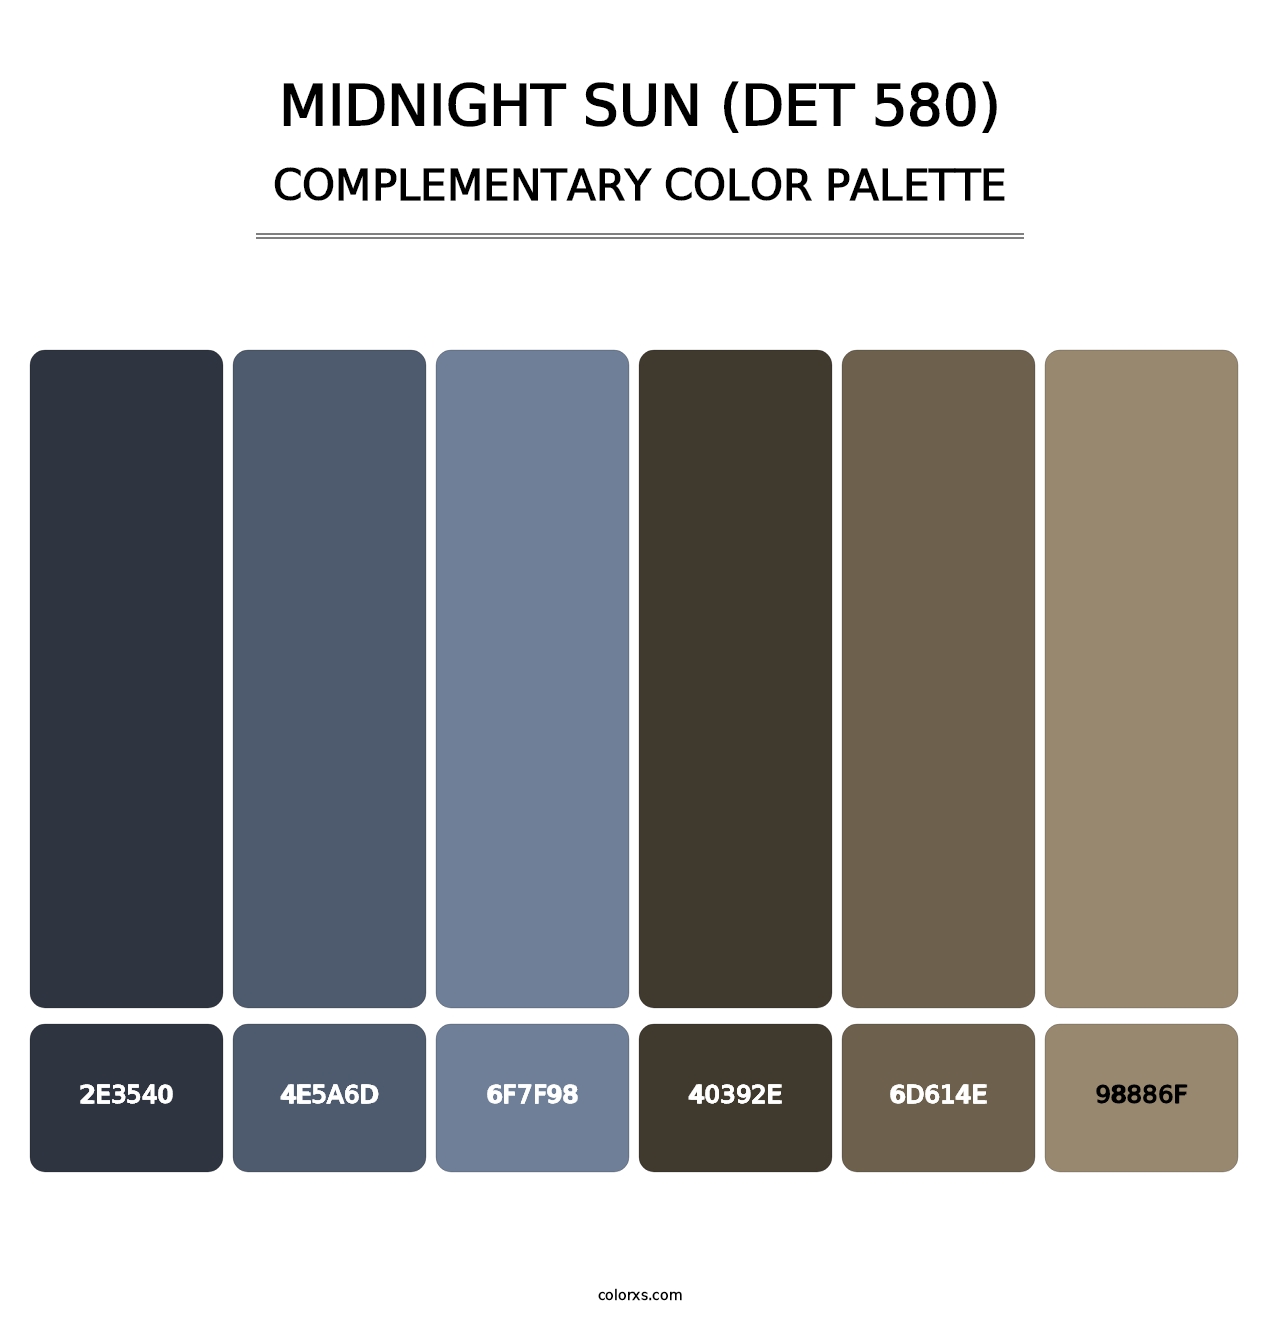 Midnight Sun (DET 580) - Complementary Color Palette